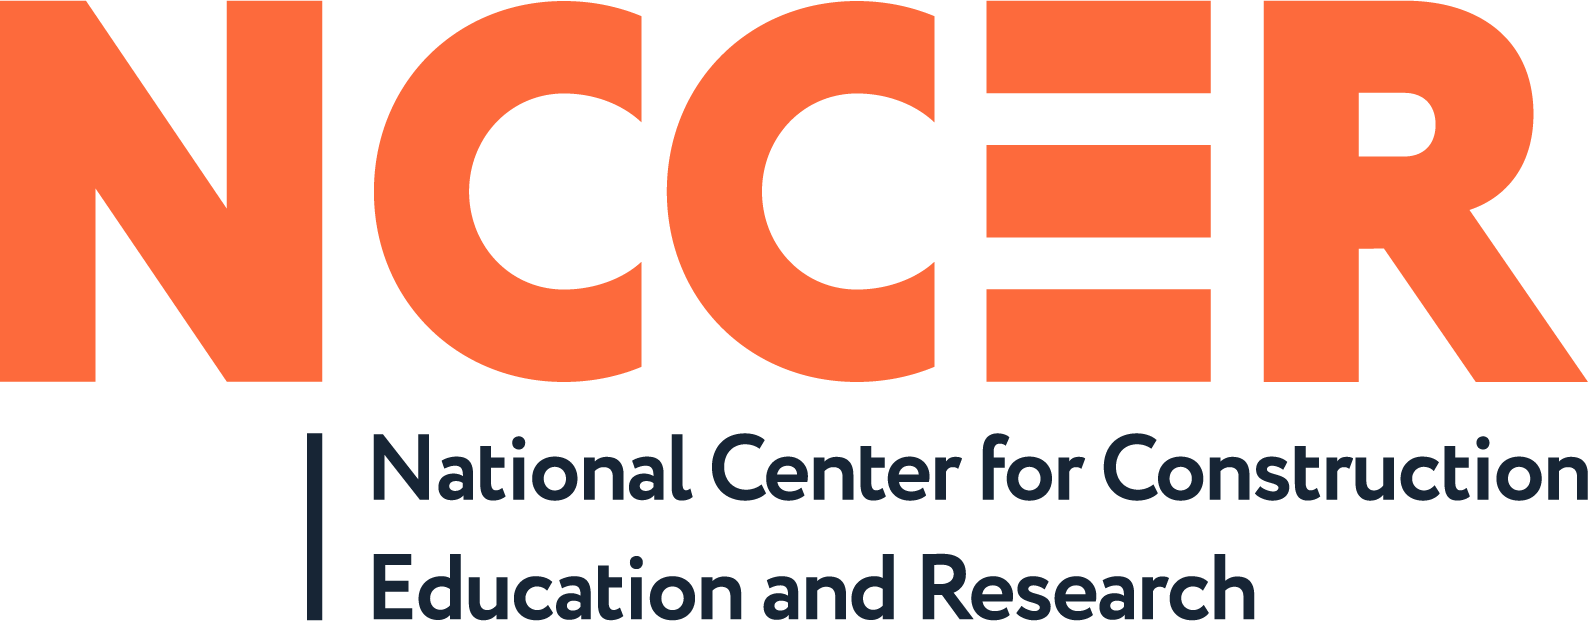 image of the National Center for Construction Education and Research logo